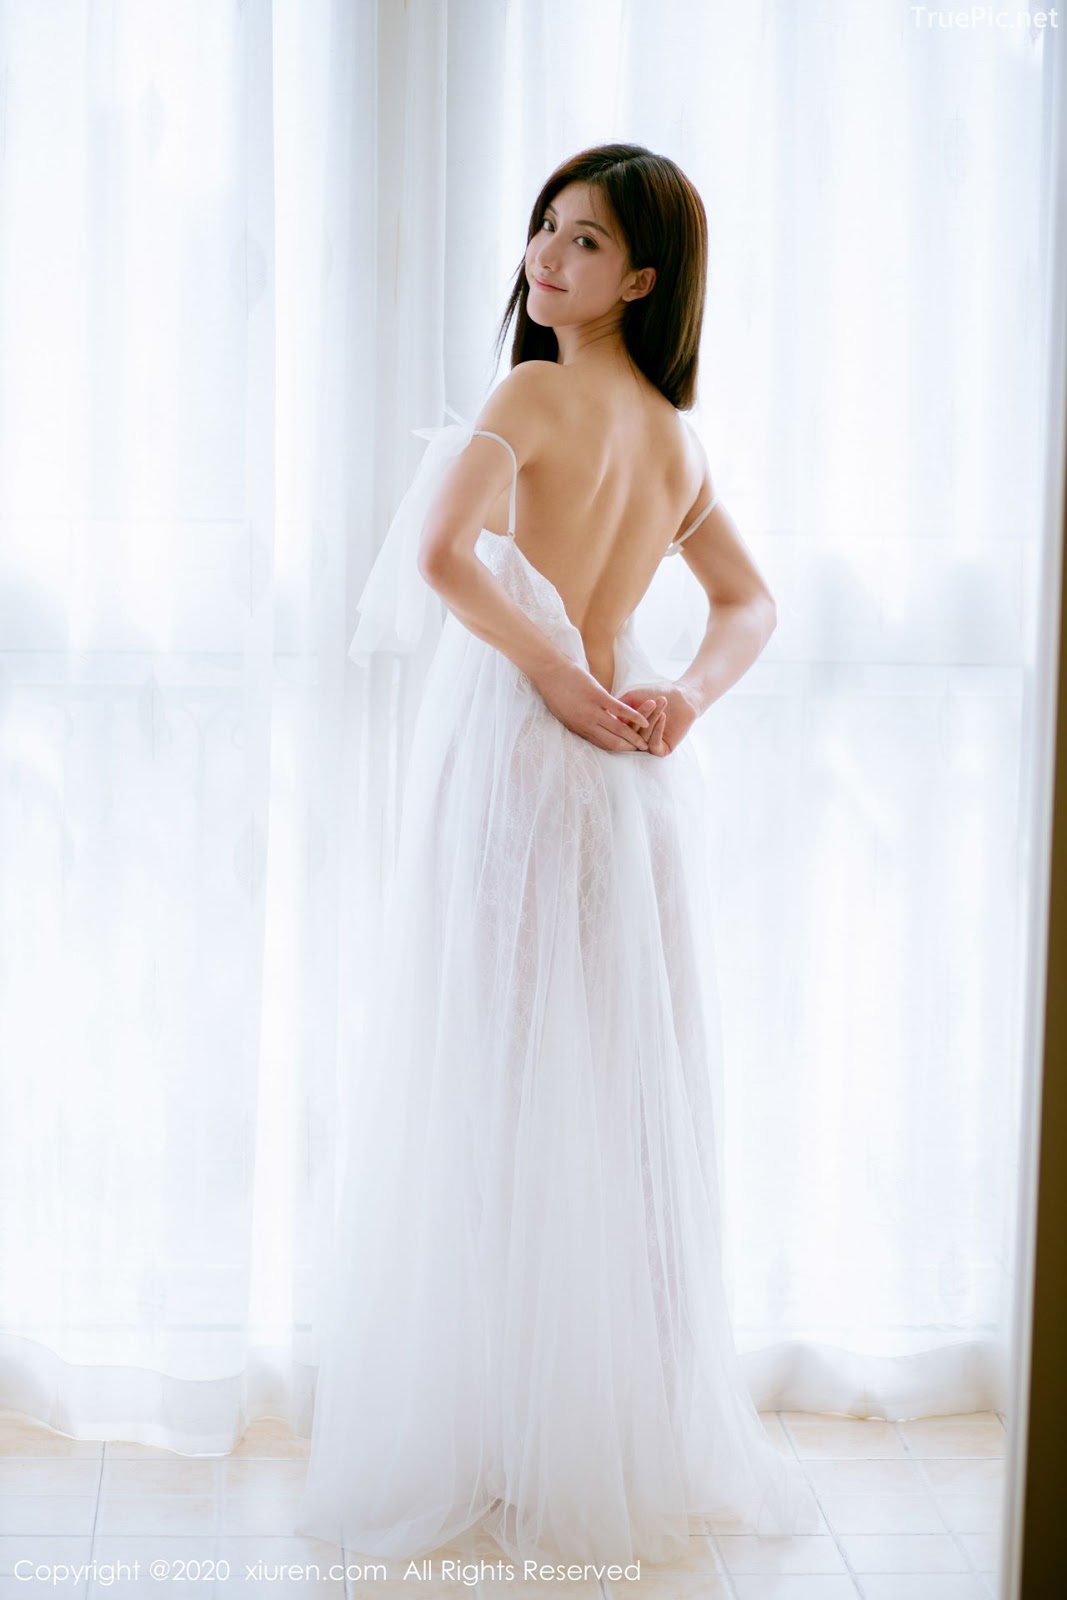 XIUREN No.1914 - Chinese model 林文文Yooki so Sexy with Transparent White Lace Dress - Picture 34